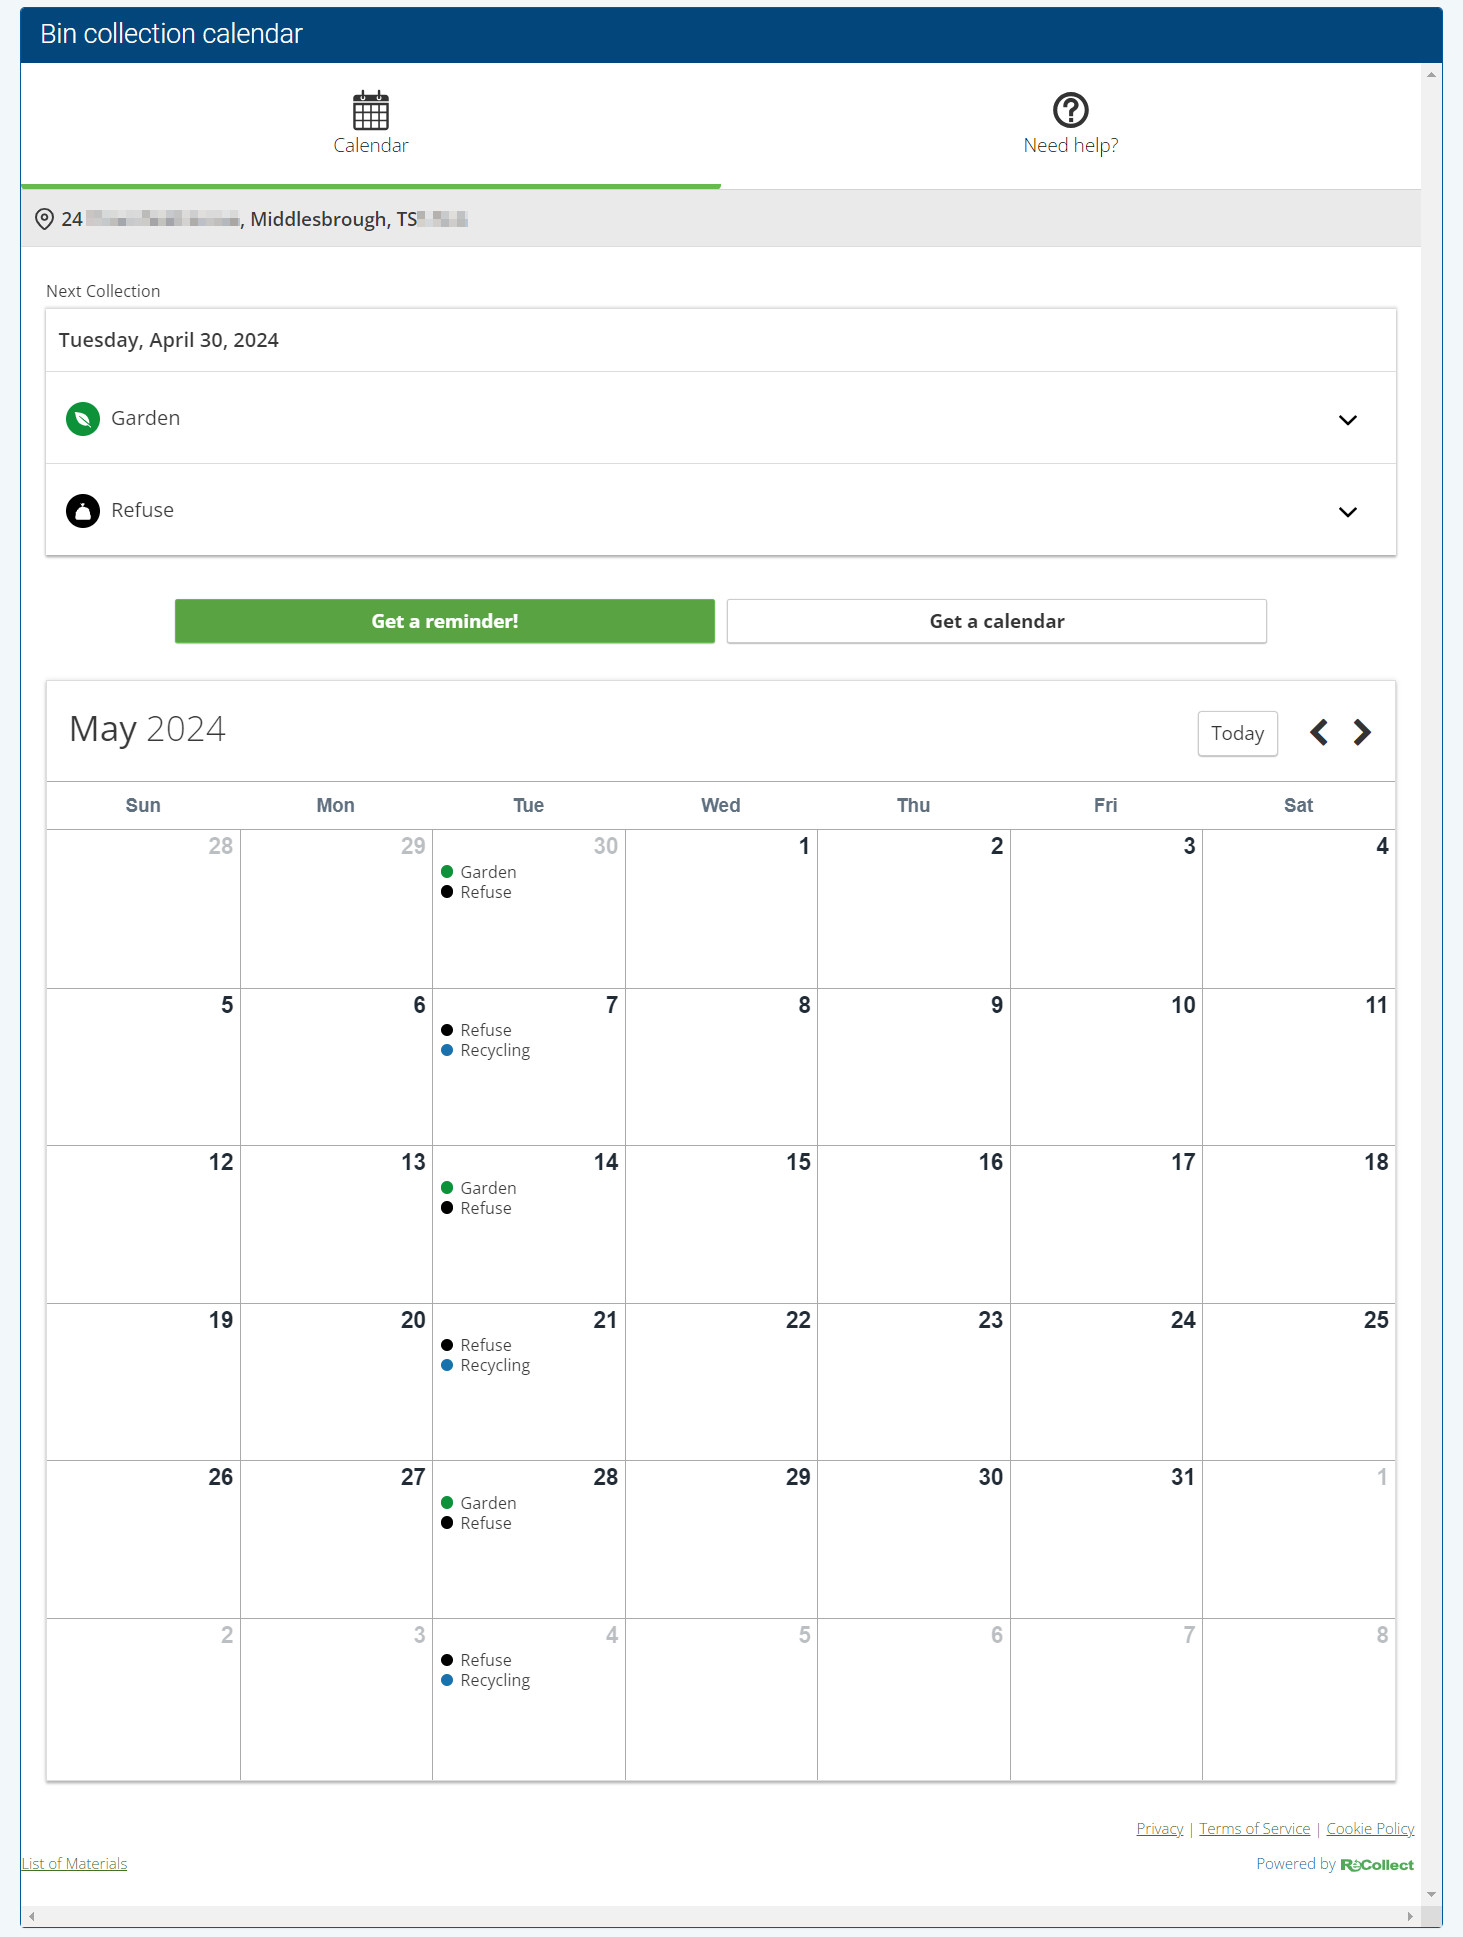 Screenshot showing the bin collection dates on MyMiddlesbrough